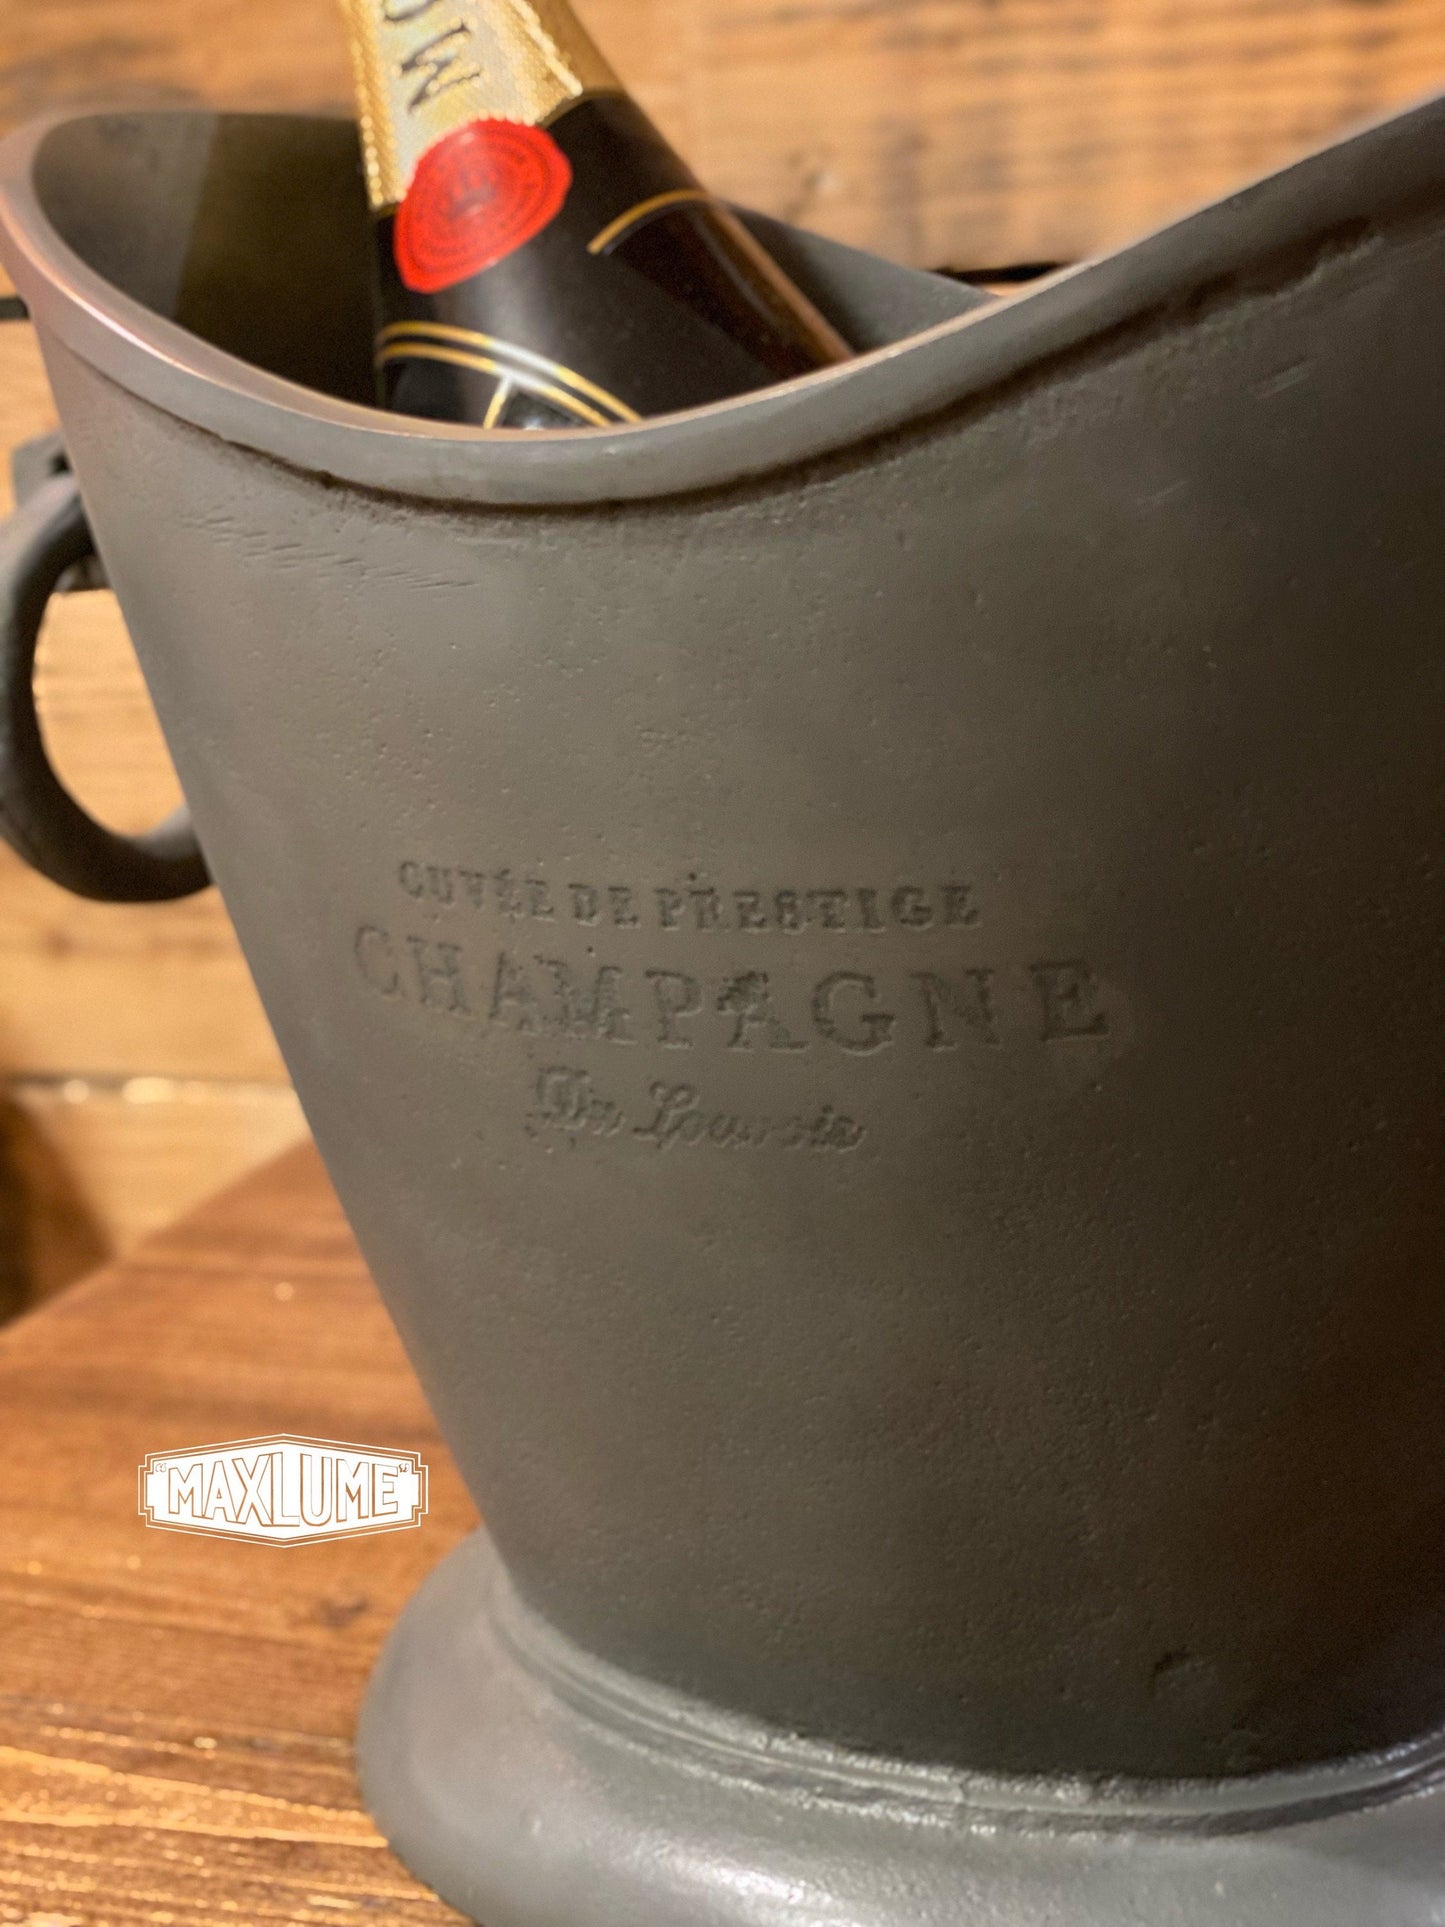 Vintage French Moet and Chandon Pewter Ice Bucket Cooler